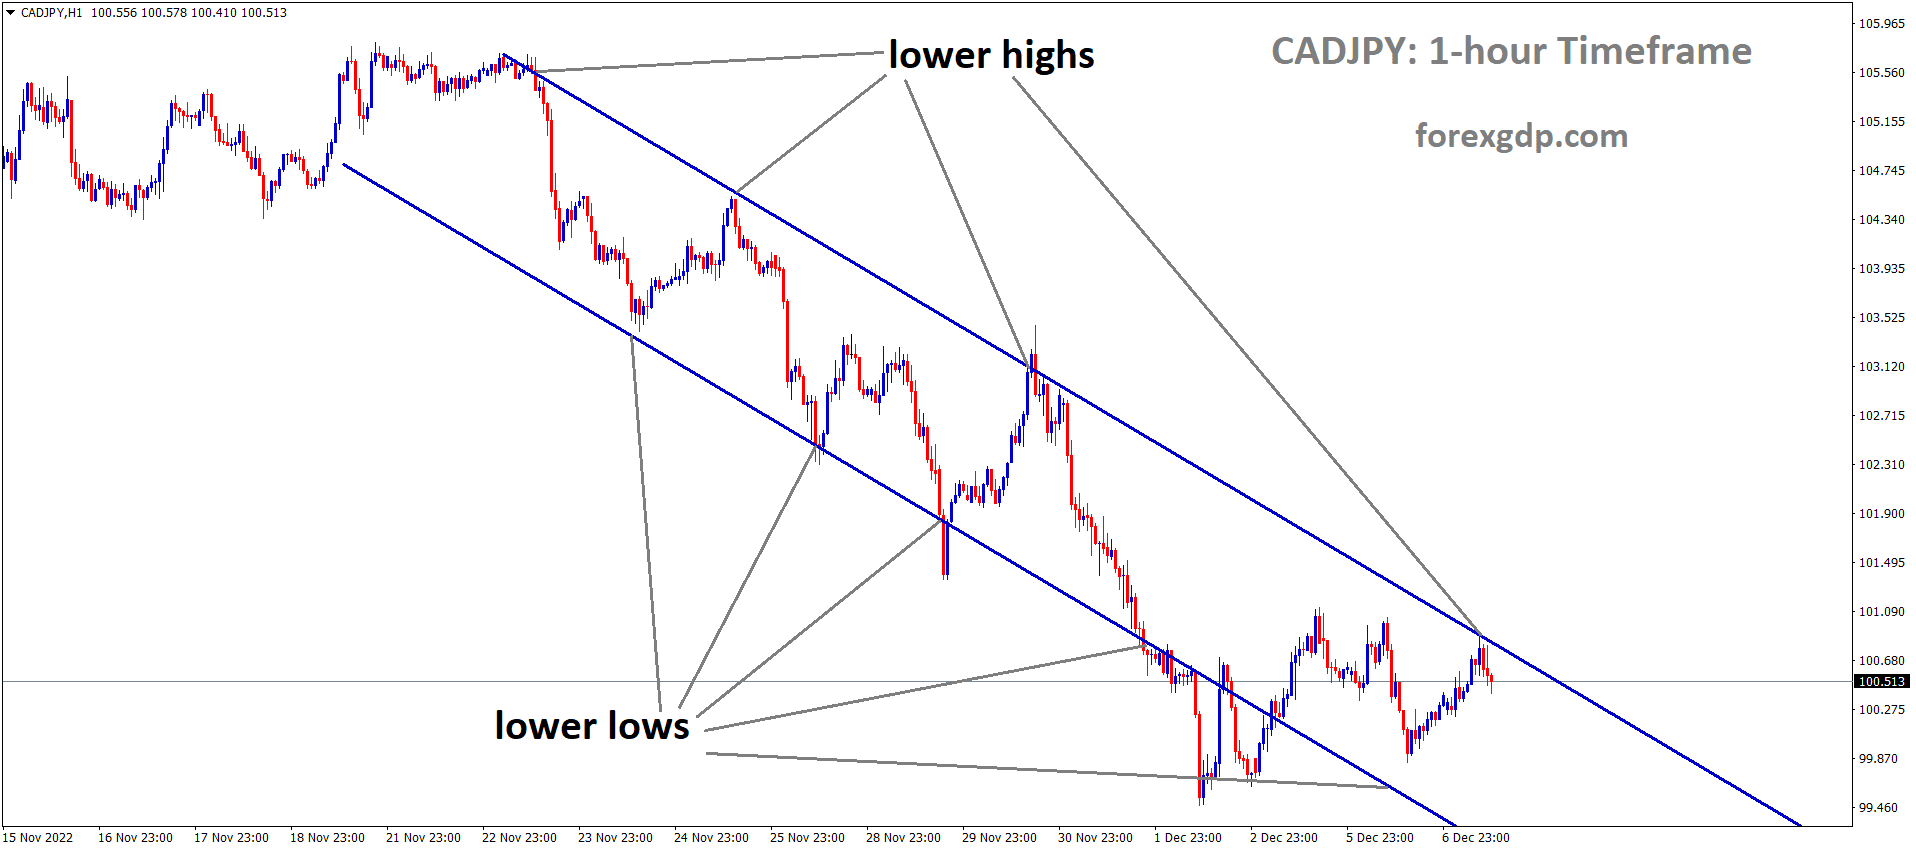 CADJPY is moving in the Descending channel and the market has fallen from the lower high area of the channel